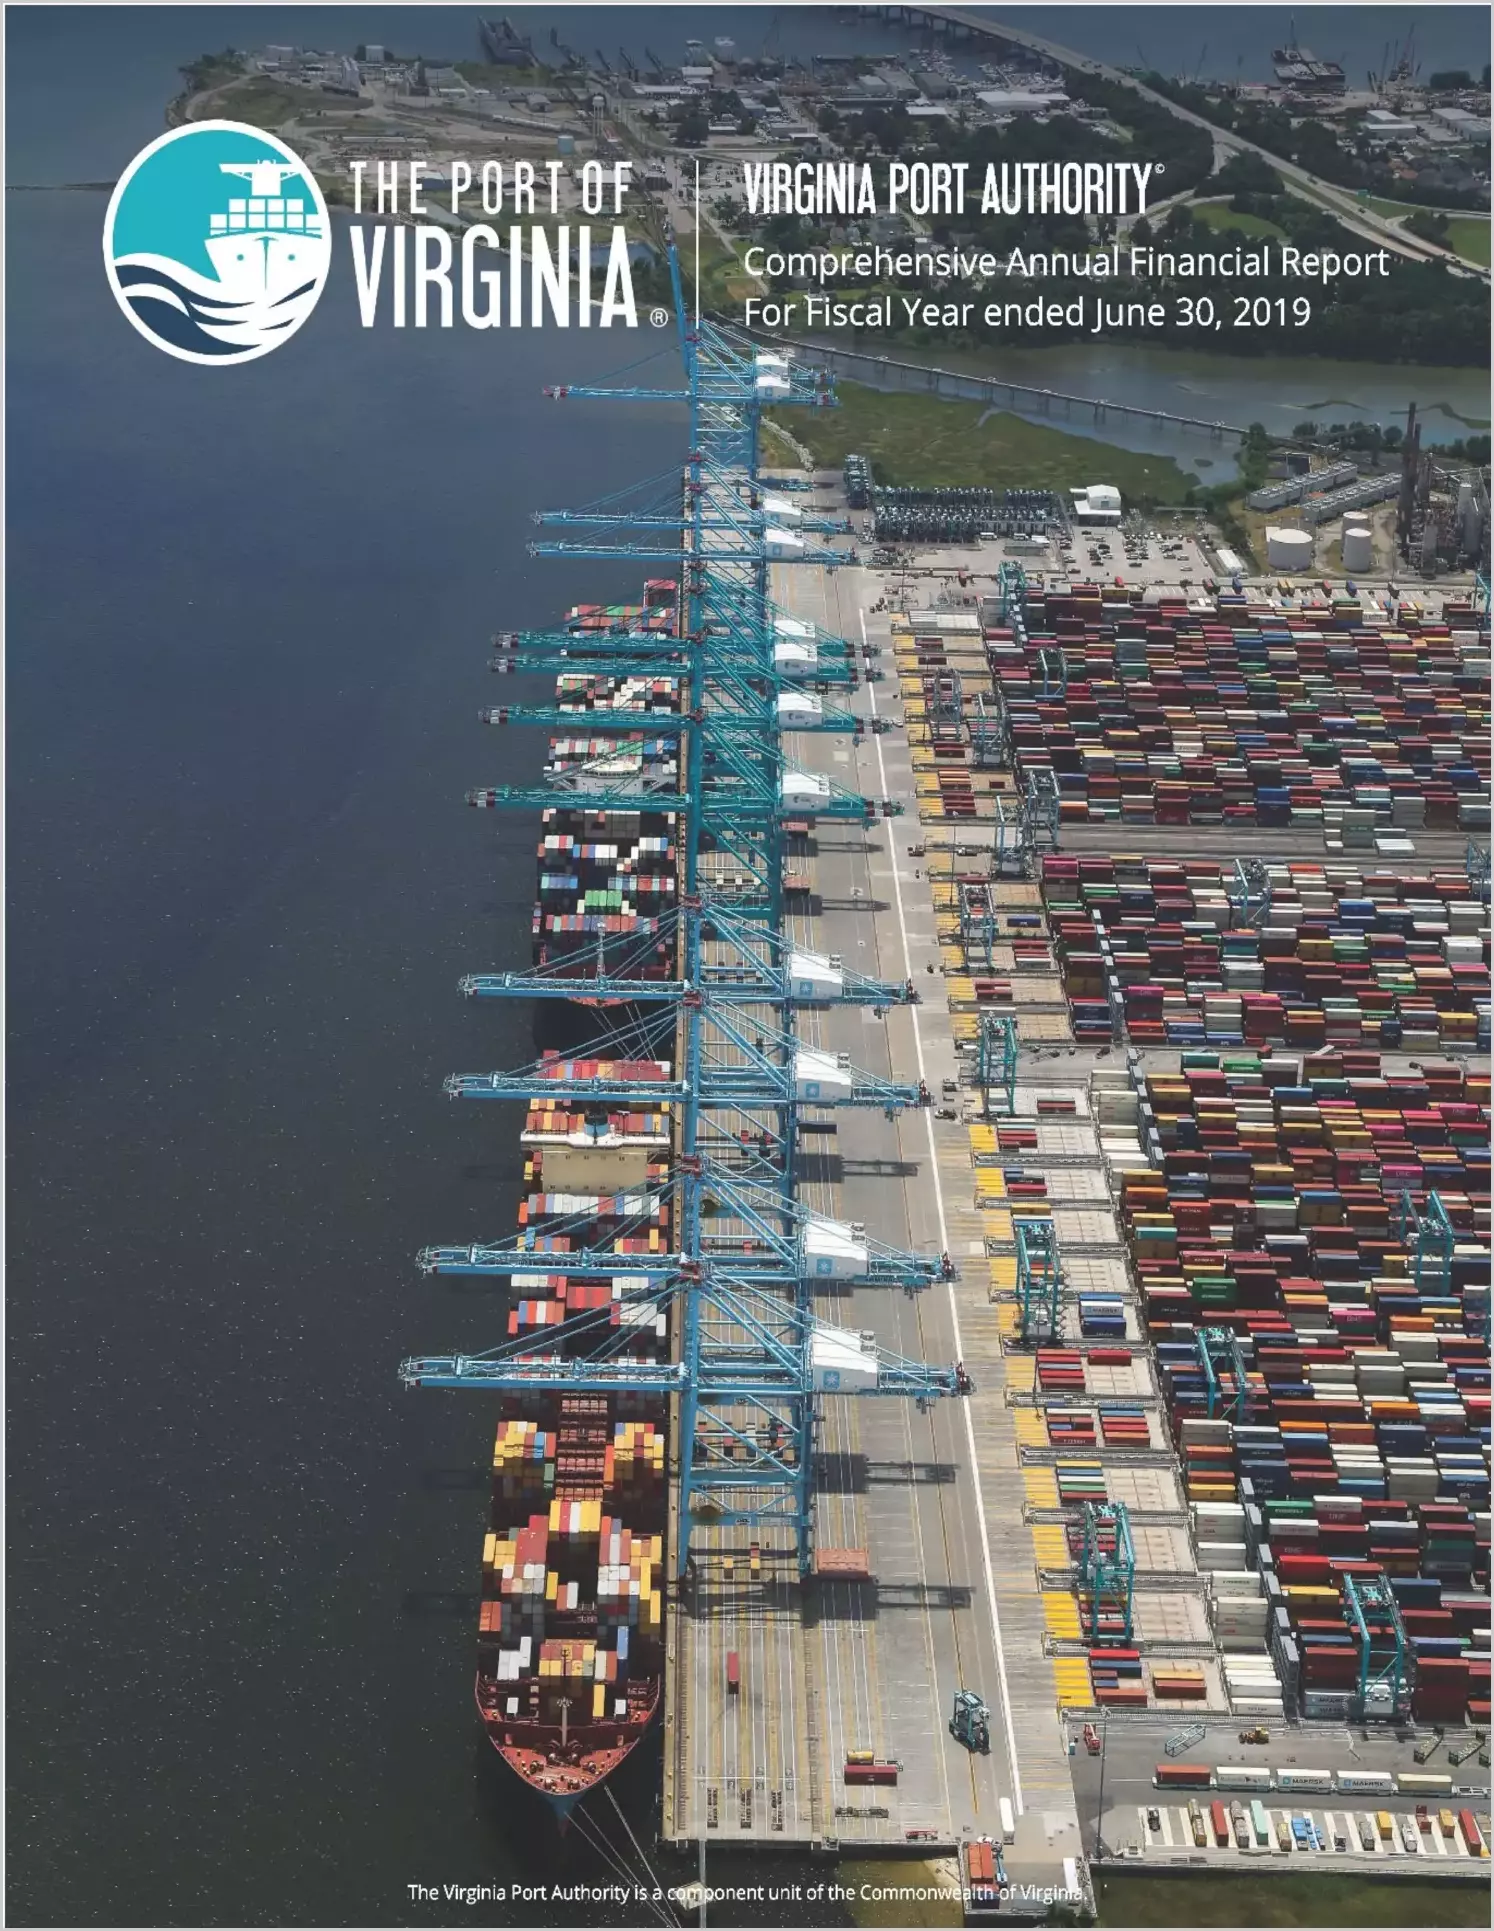 Virginia Port Authority Financial Statements for the year ended June 30, 2019